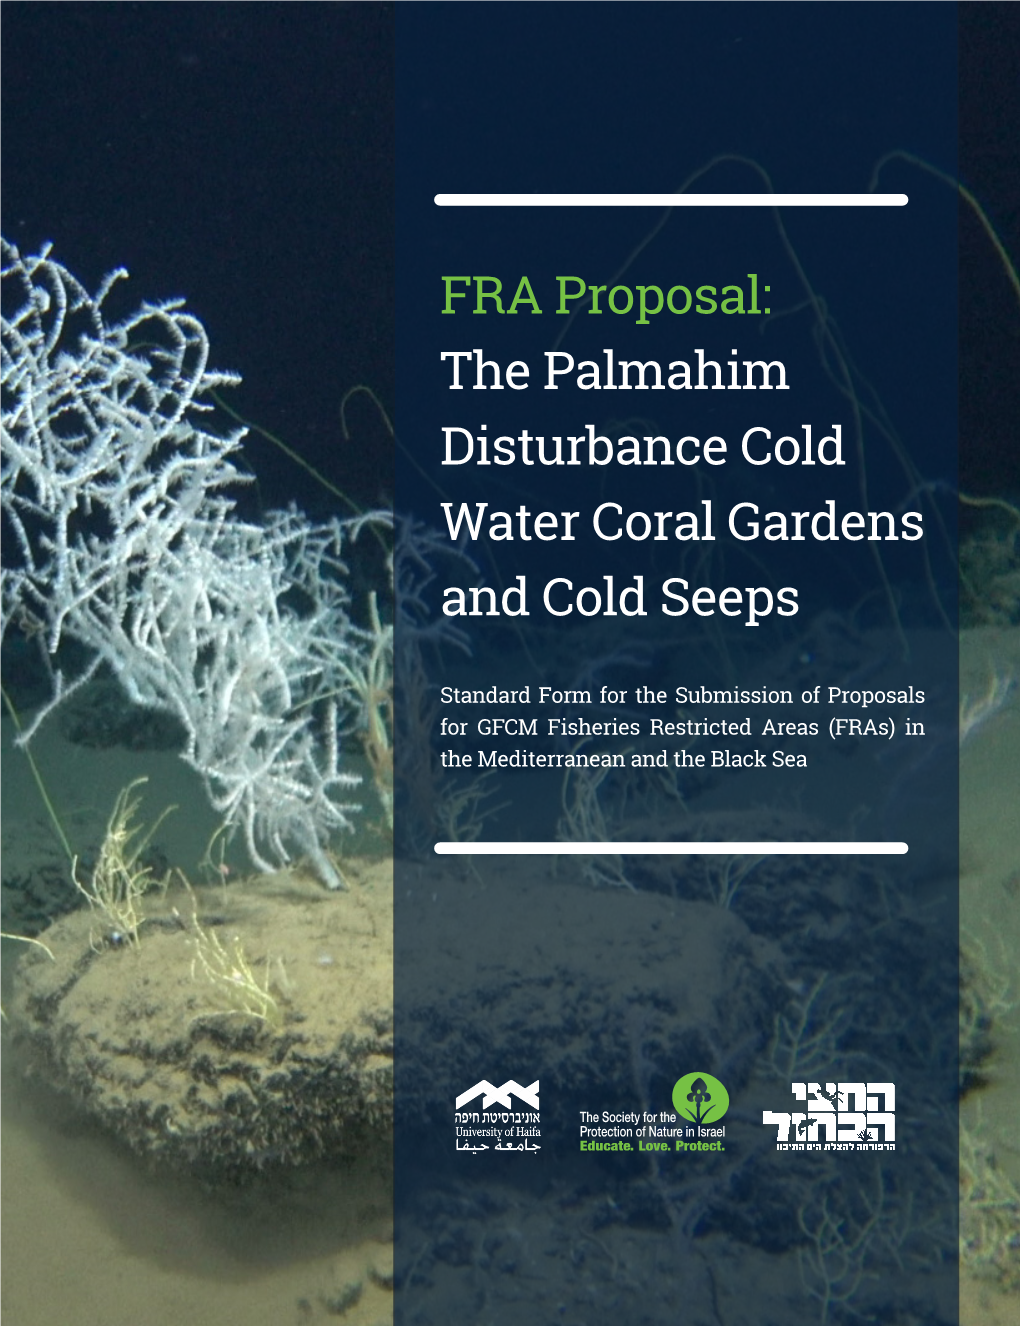 FRA Proposal: the Palmahim Disturbance Cold Water Coral Gardens and Cold Seeps